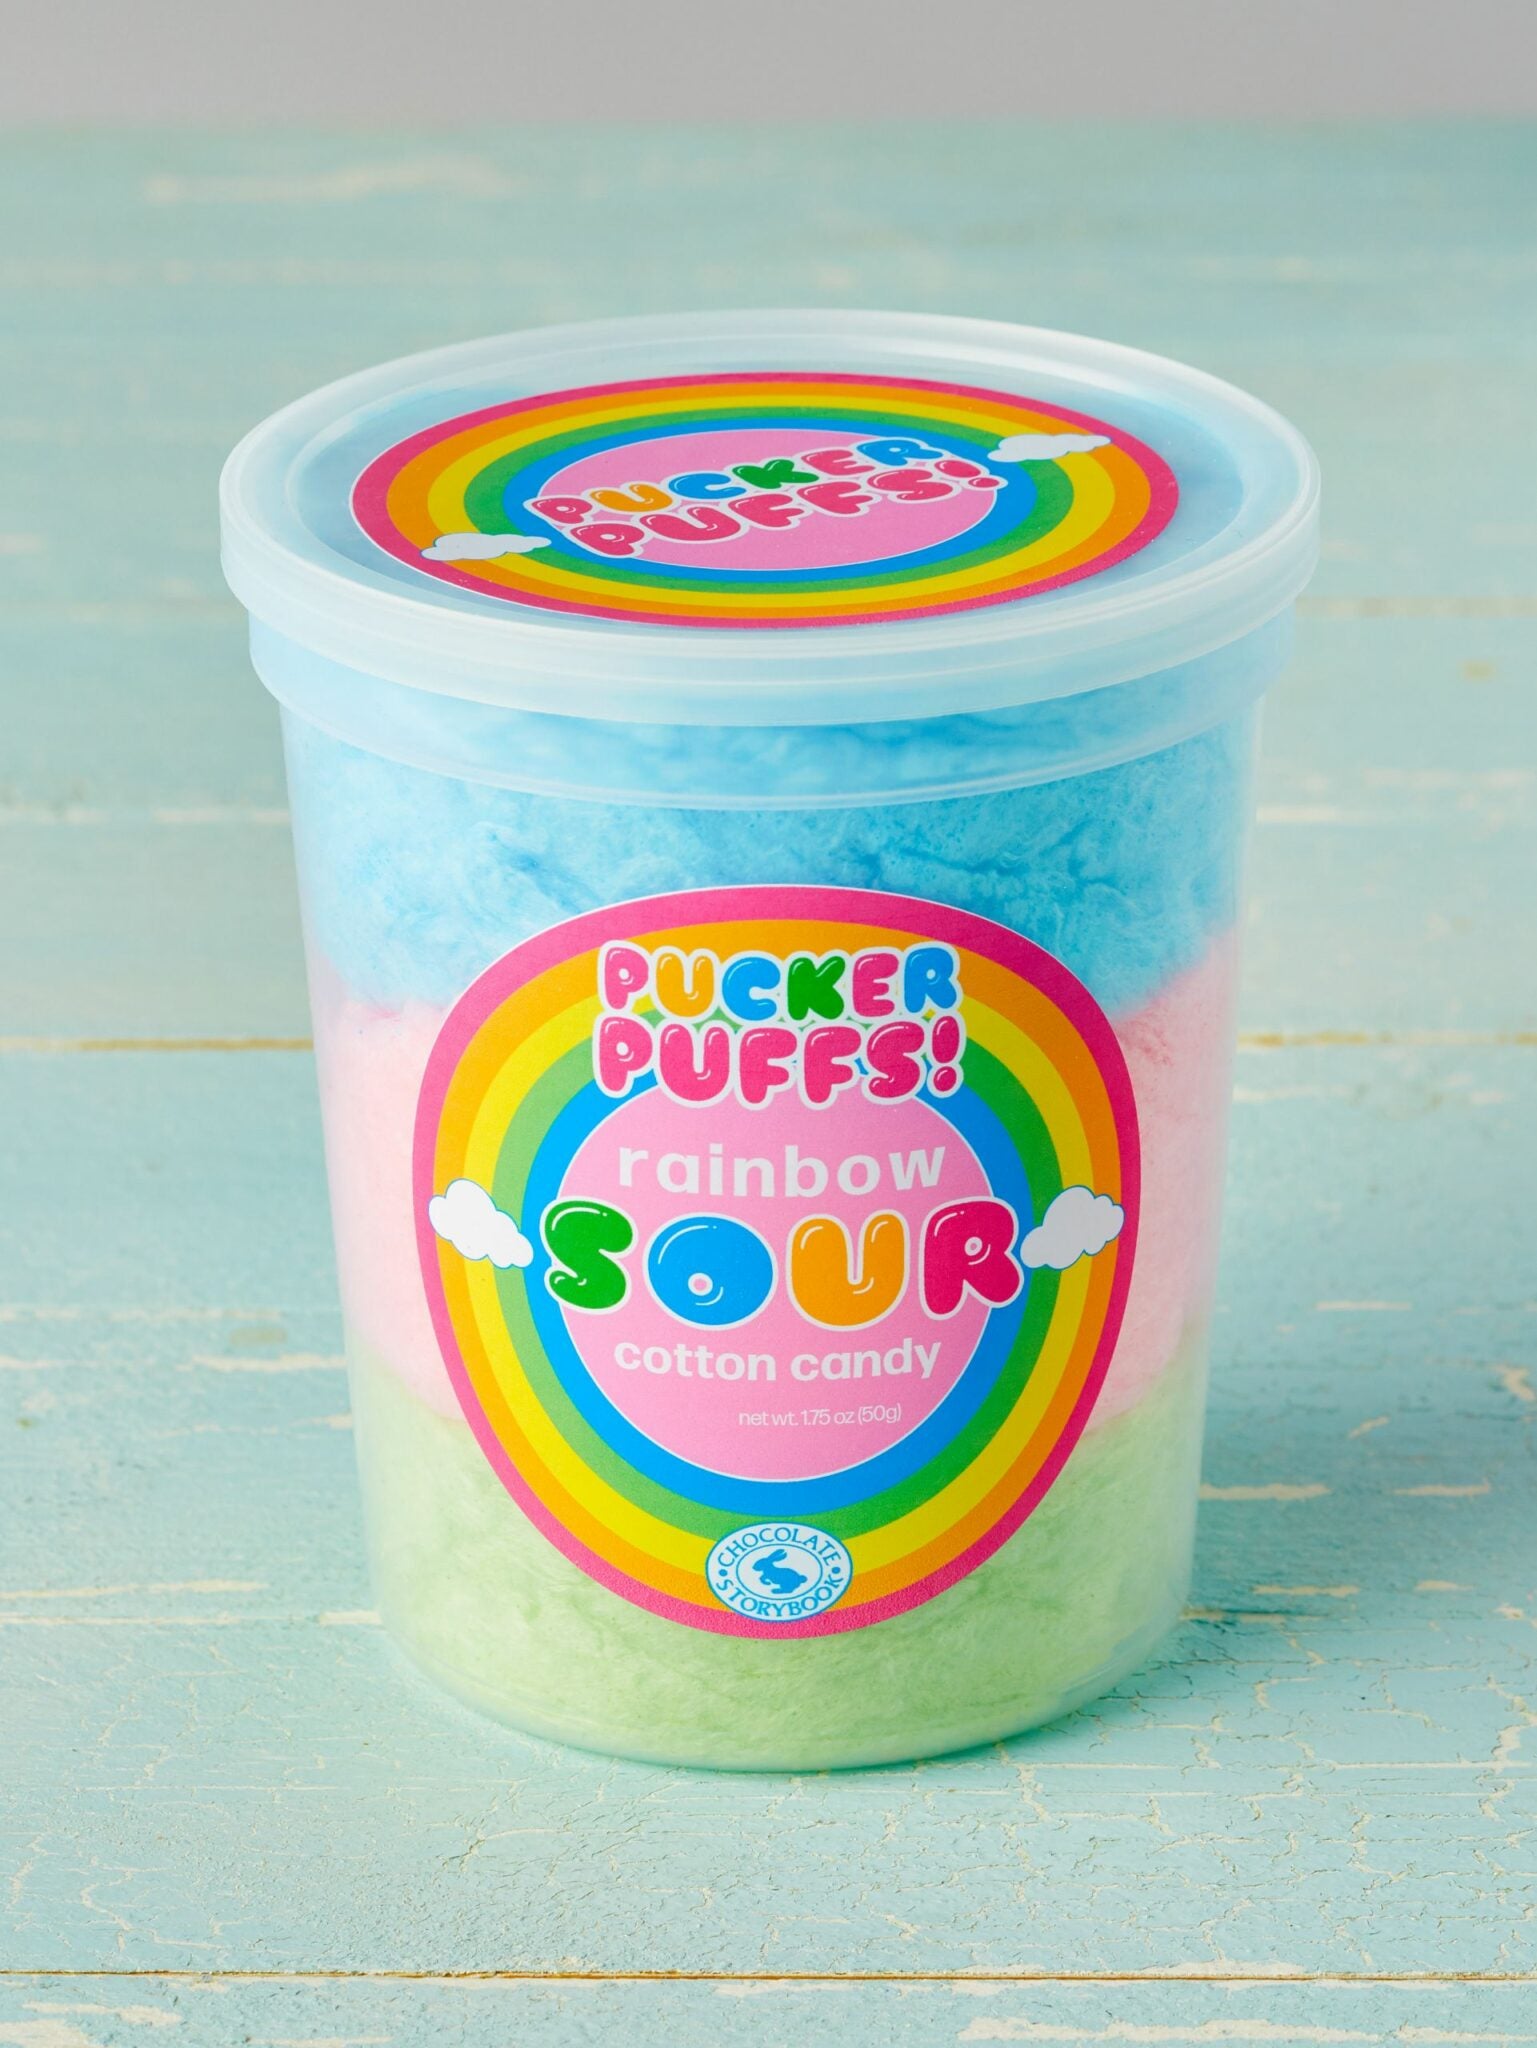 Puckers Puffs Sour Rainbow  - Cotton Candy